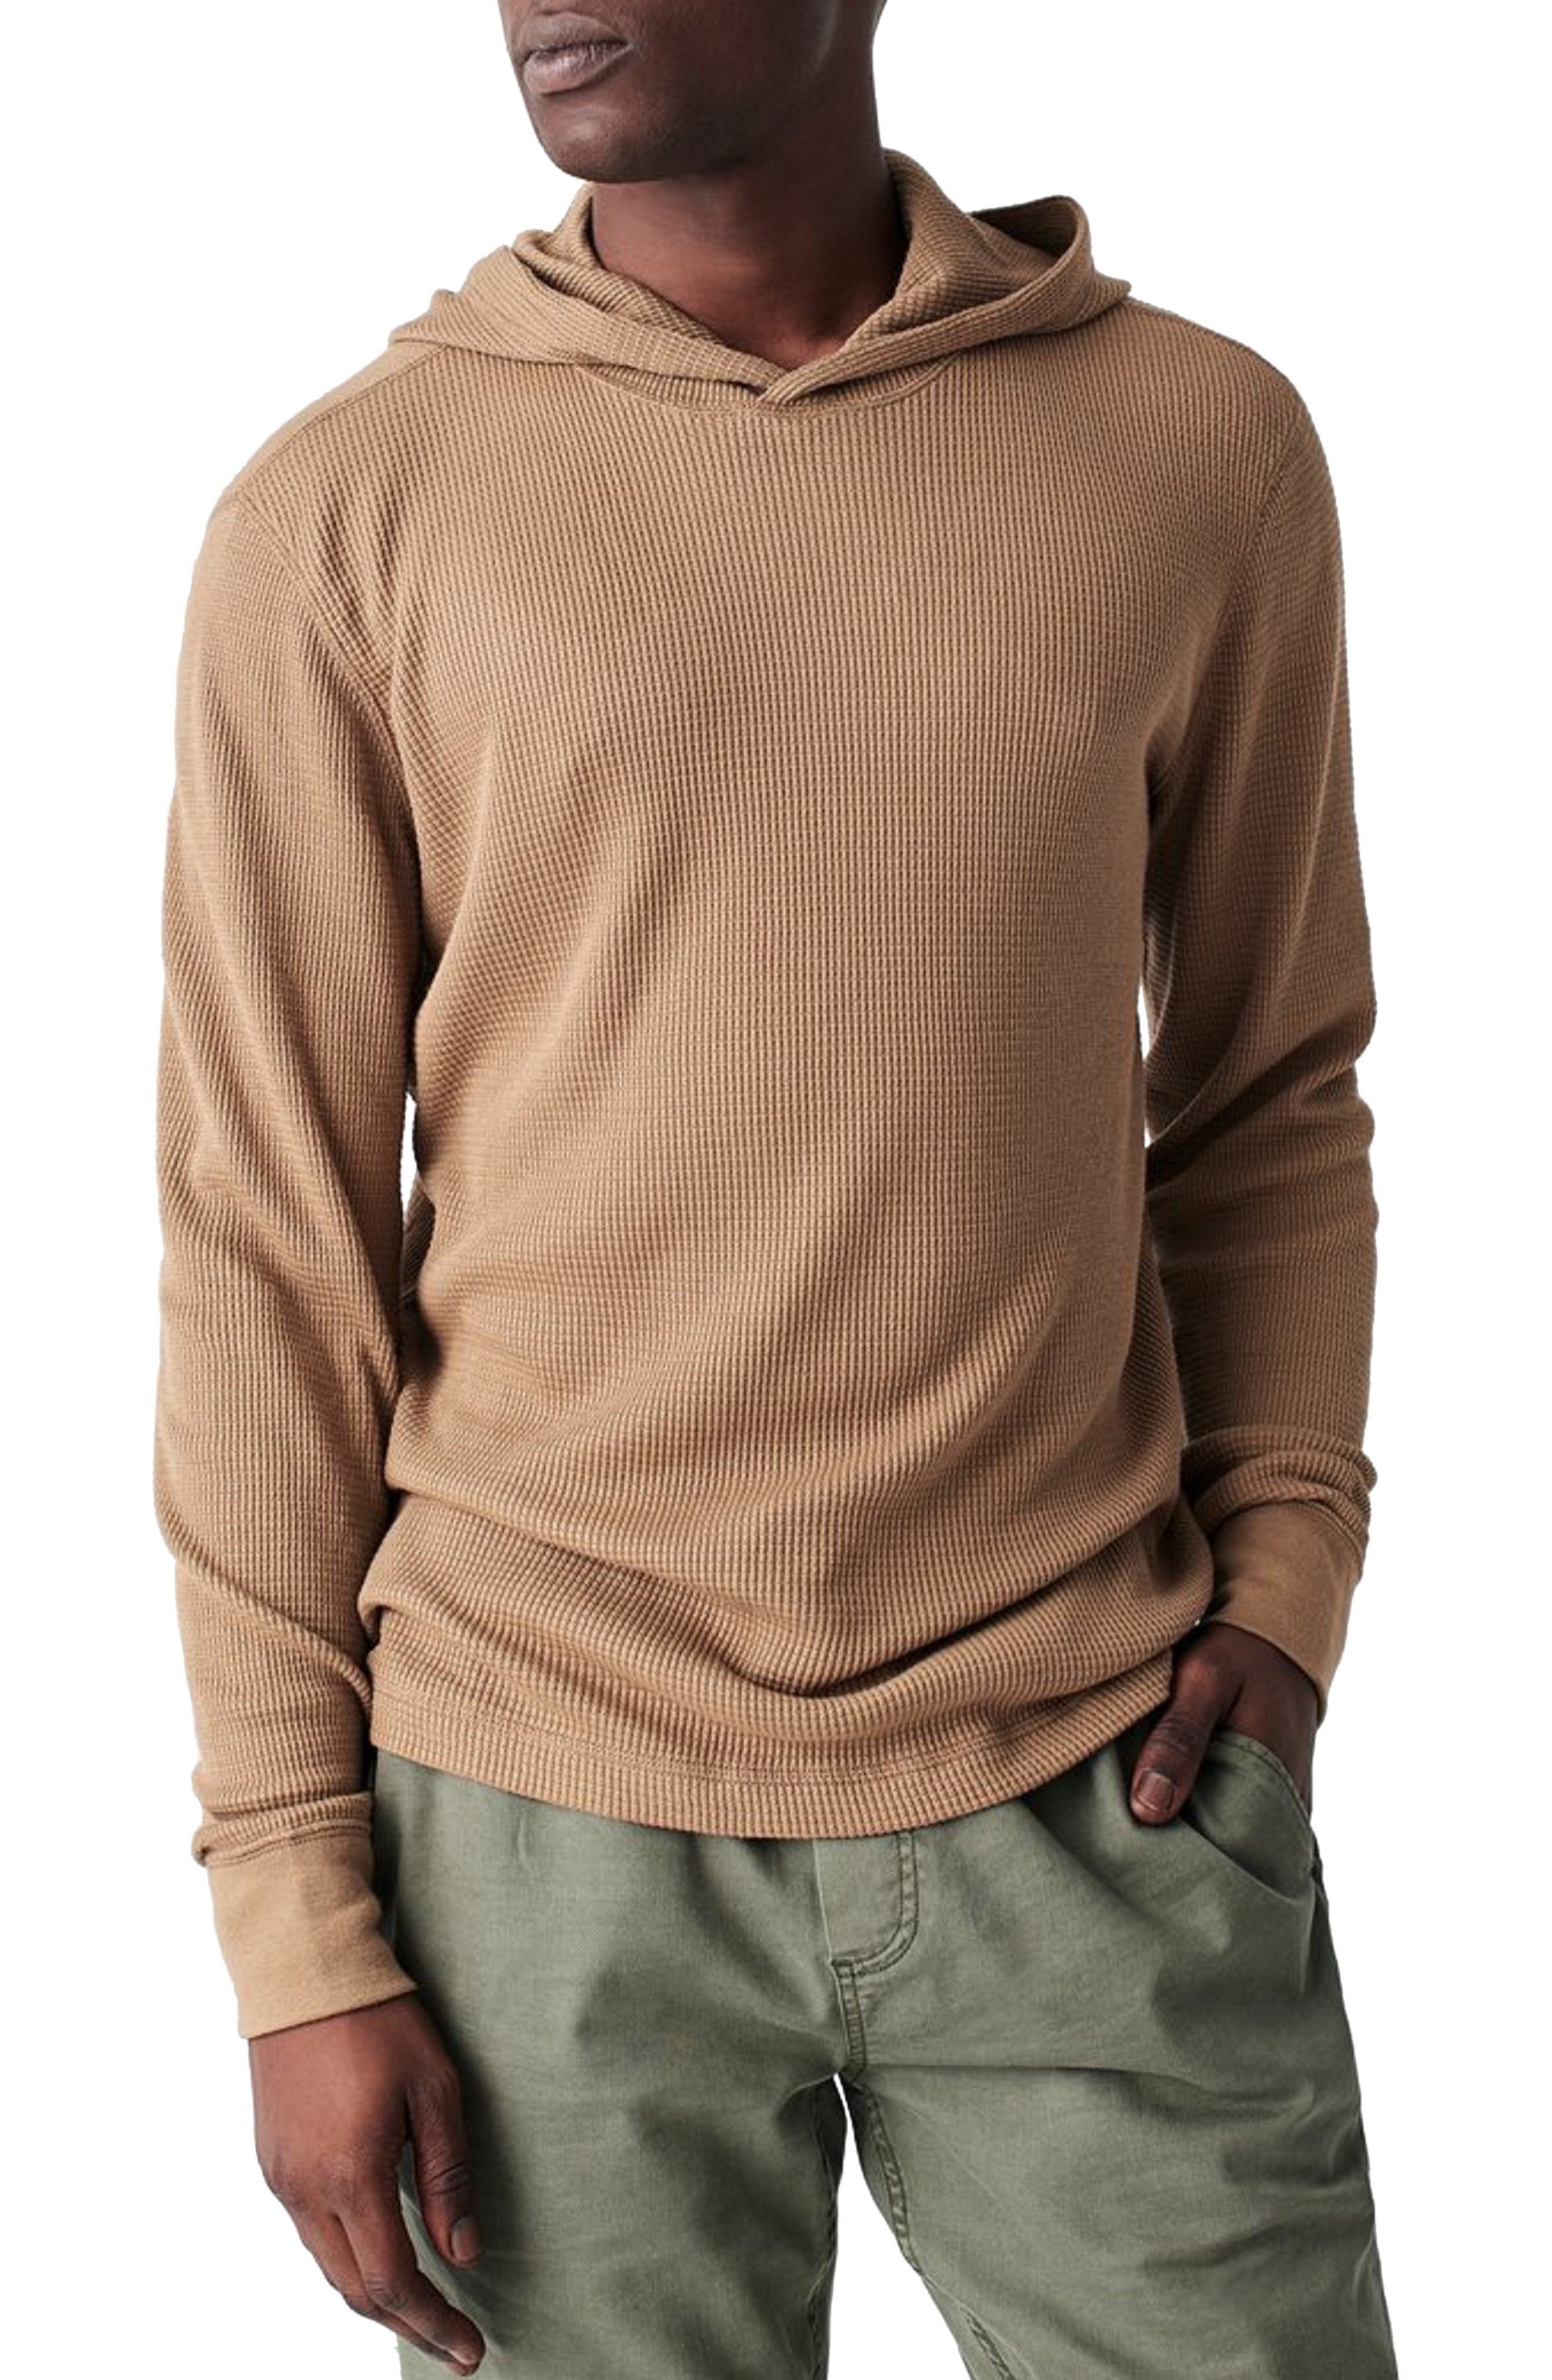 Maan Store Men Sweatshirt with Front Knitted Design and Pocket